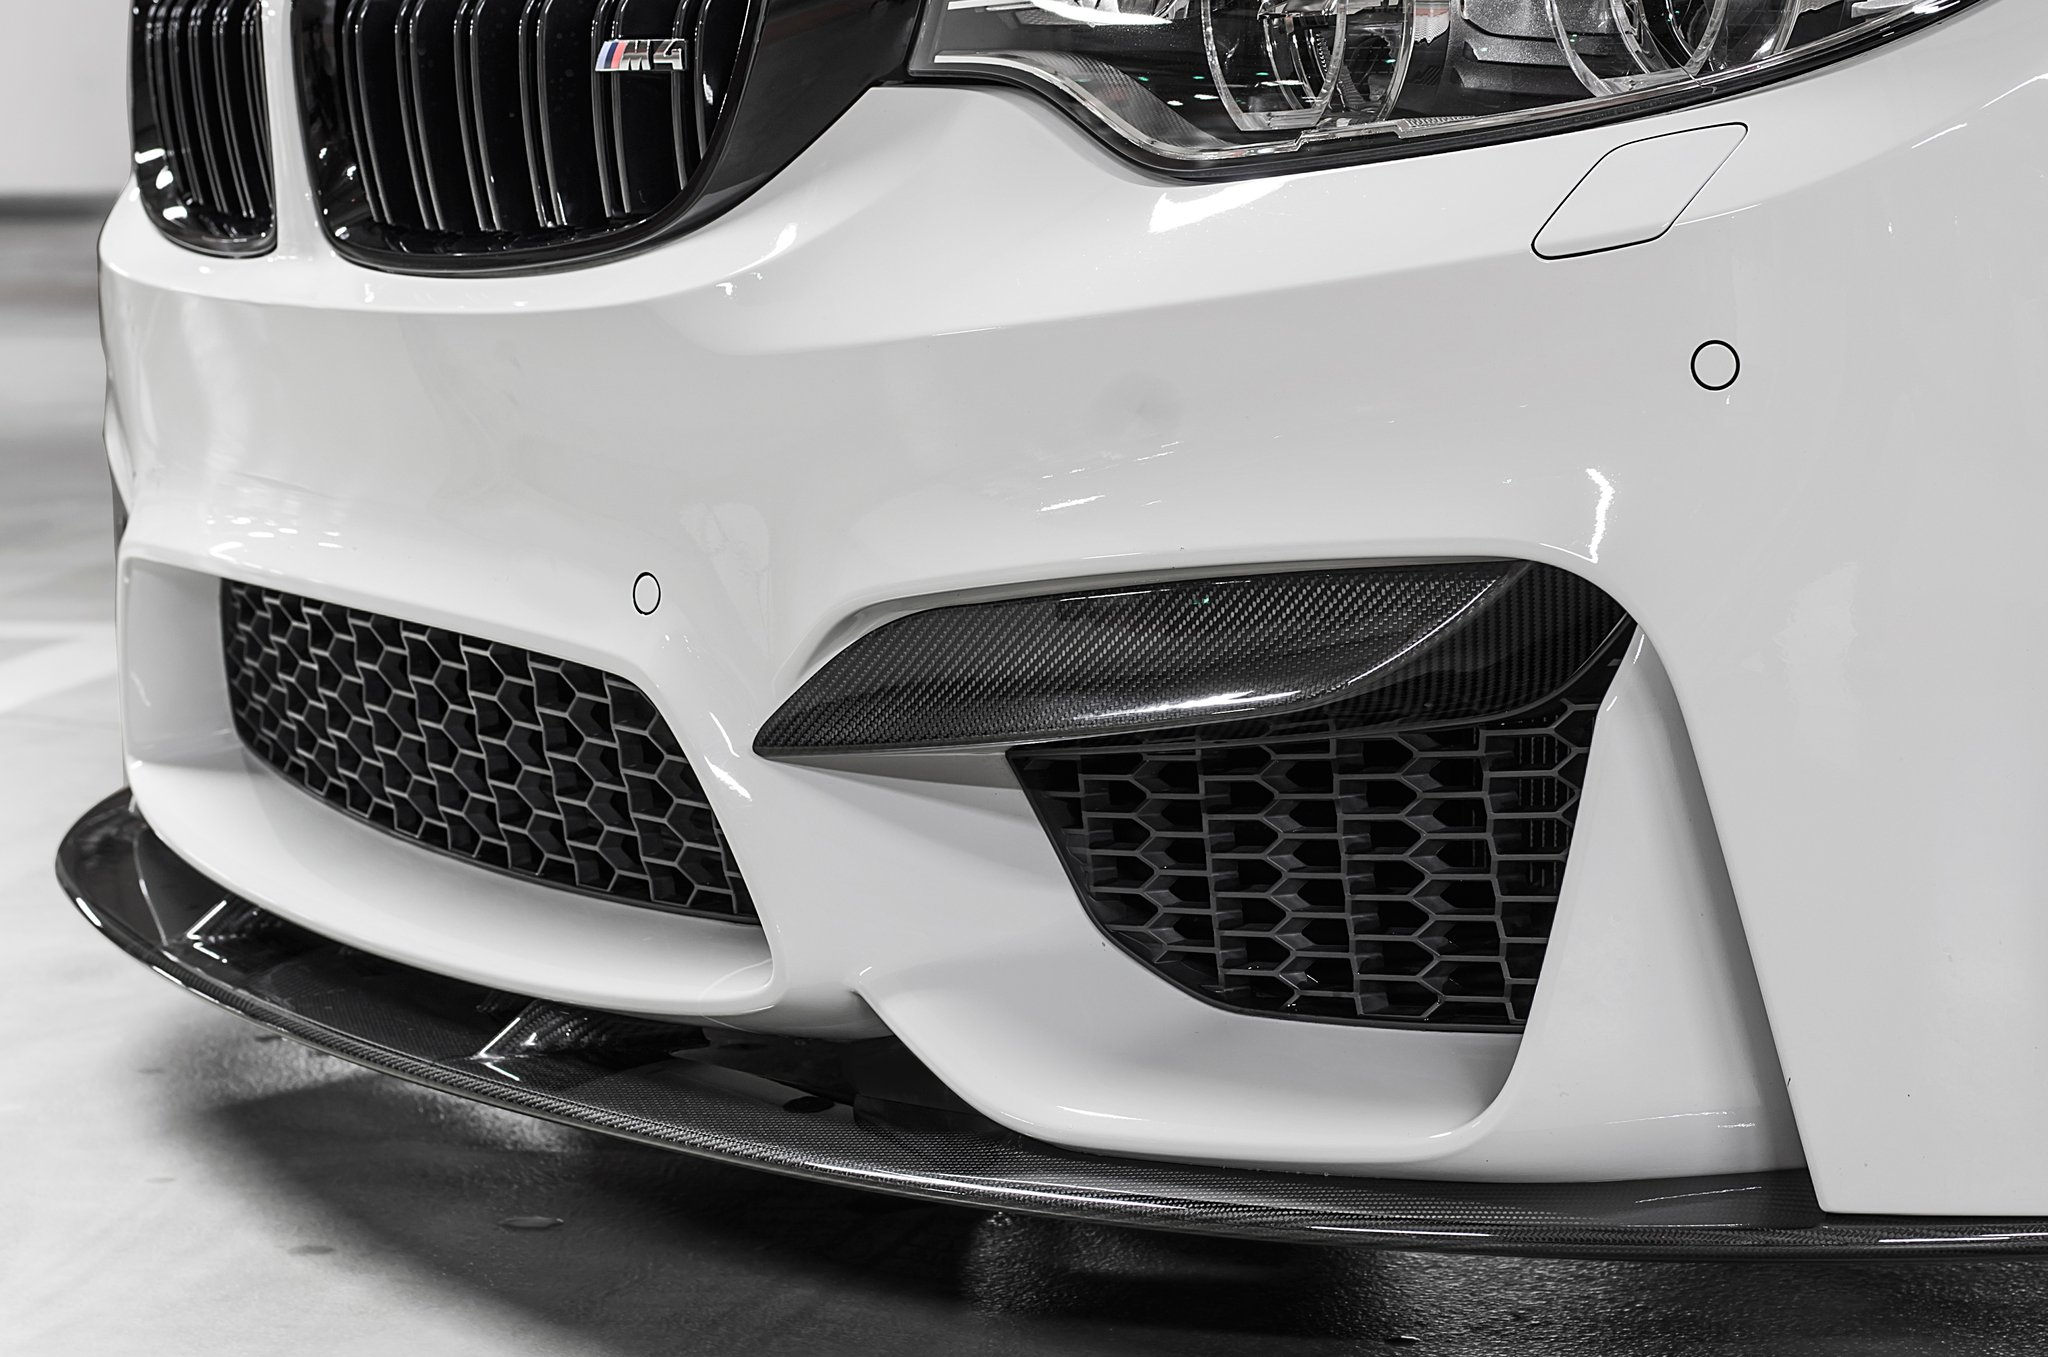 Sterckenn Carbon Fiber front covers for BMW M4 F82 new model